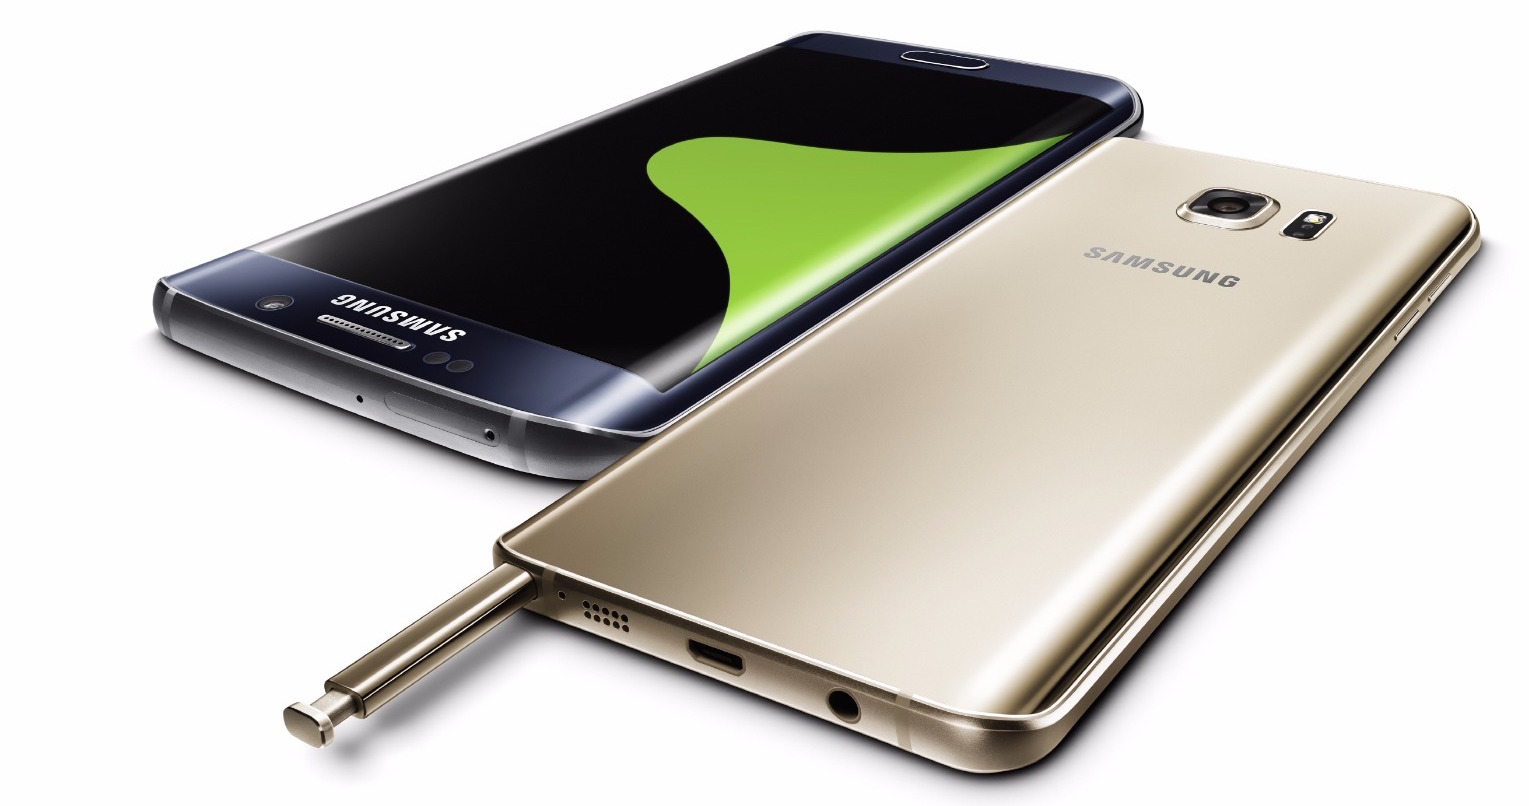 judge-orders-samsung-to-stop-ripping-off-apple-image-cultofandroidcomwp-contentuploads201509Samsung-Galaxy-S6-Edge-and-Note-5-jpg